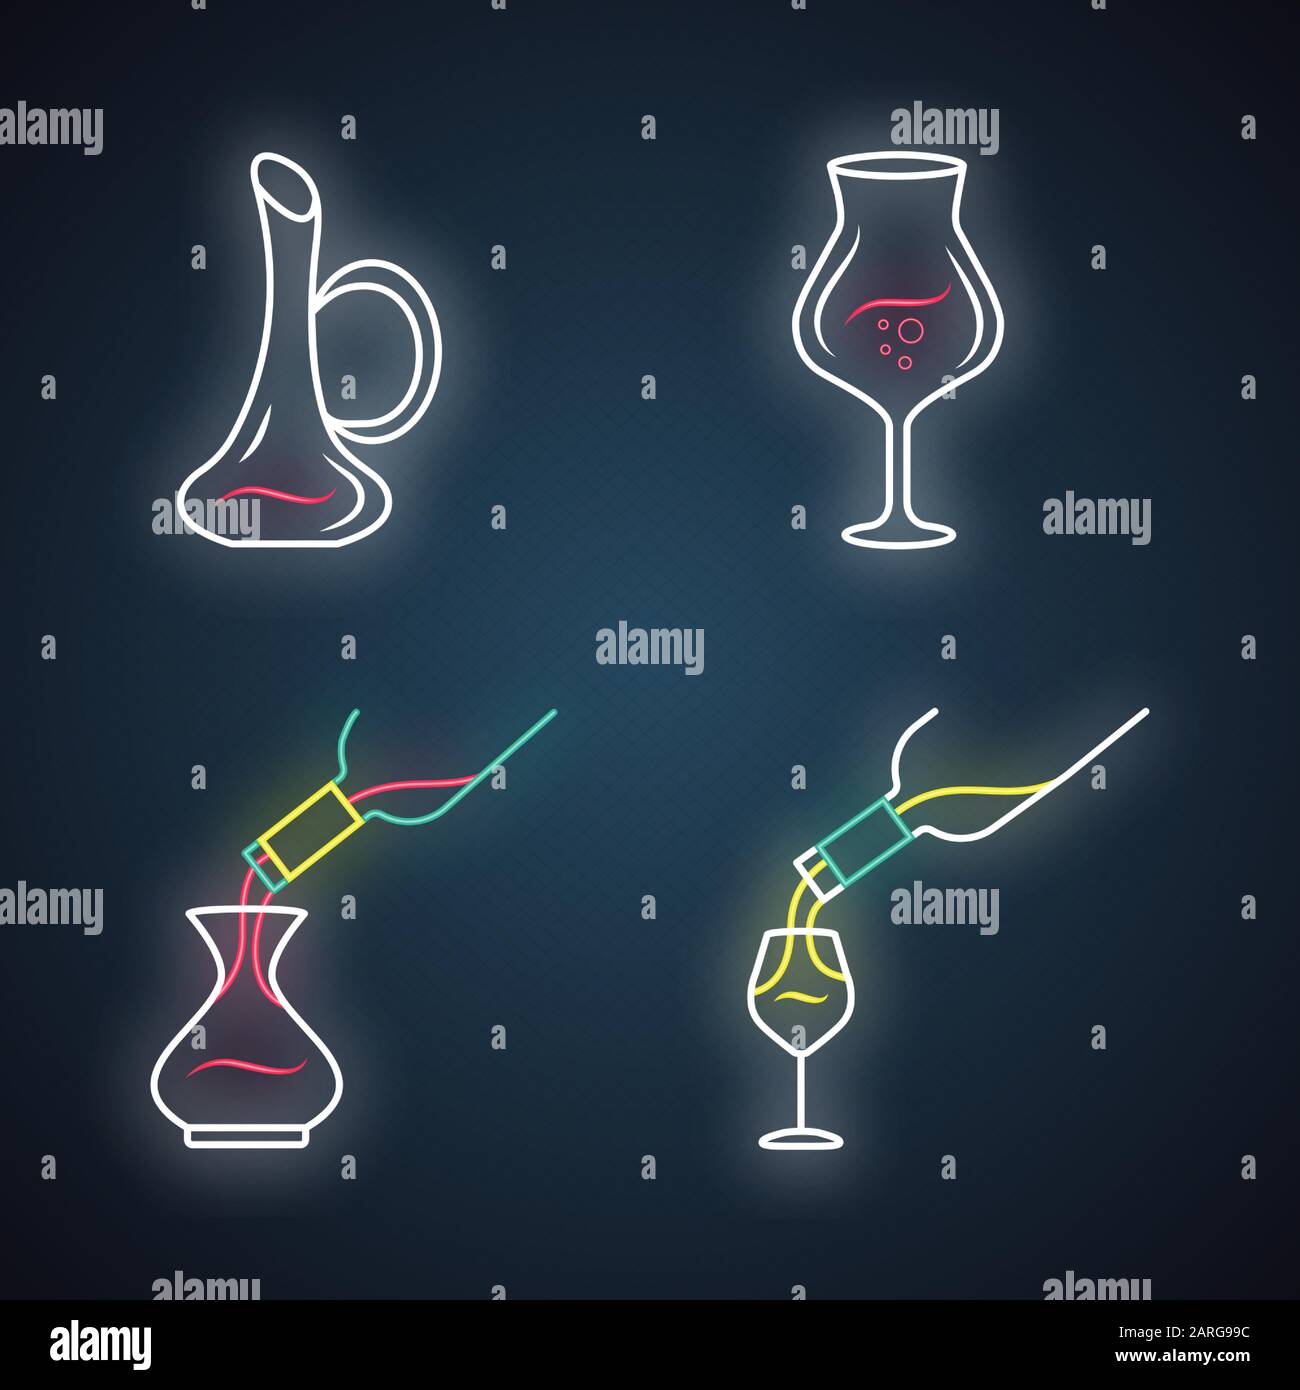 Wine service neon light icons set. Alcohol beverage pouring in glass. Wineglasses, decanters. Different types of aperitif drinks. Barman. Glowing sign Stock Vector